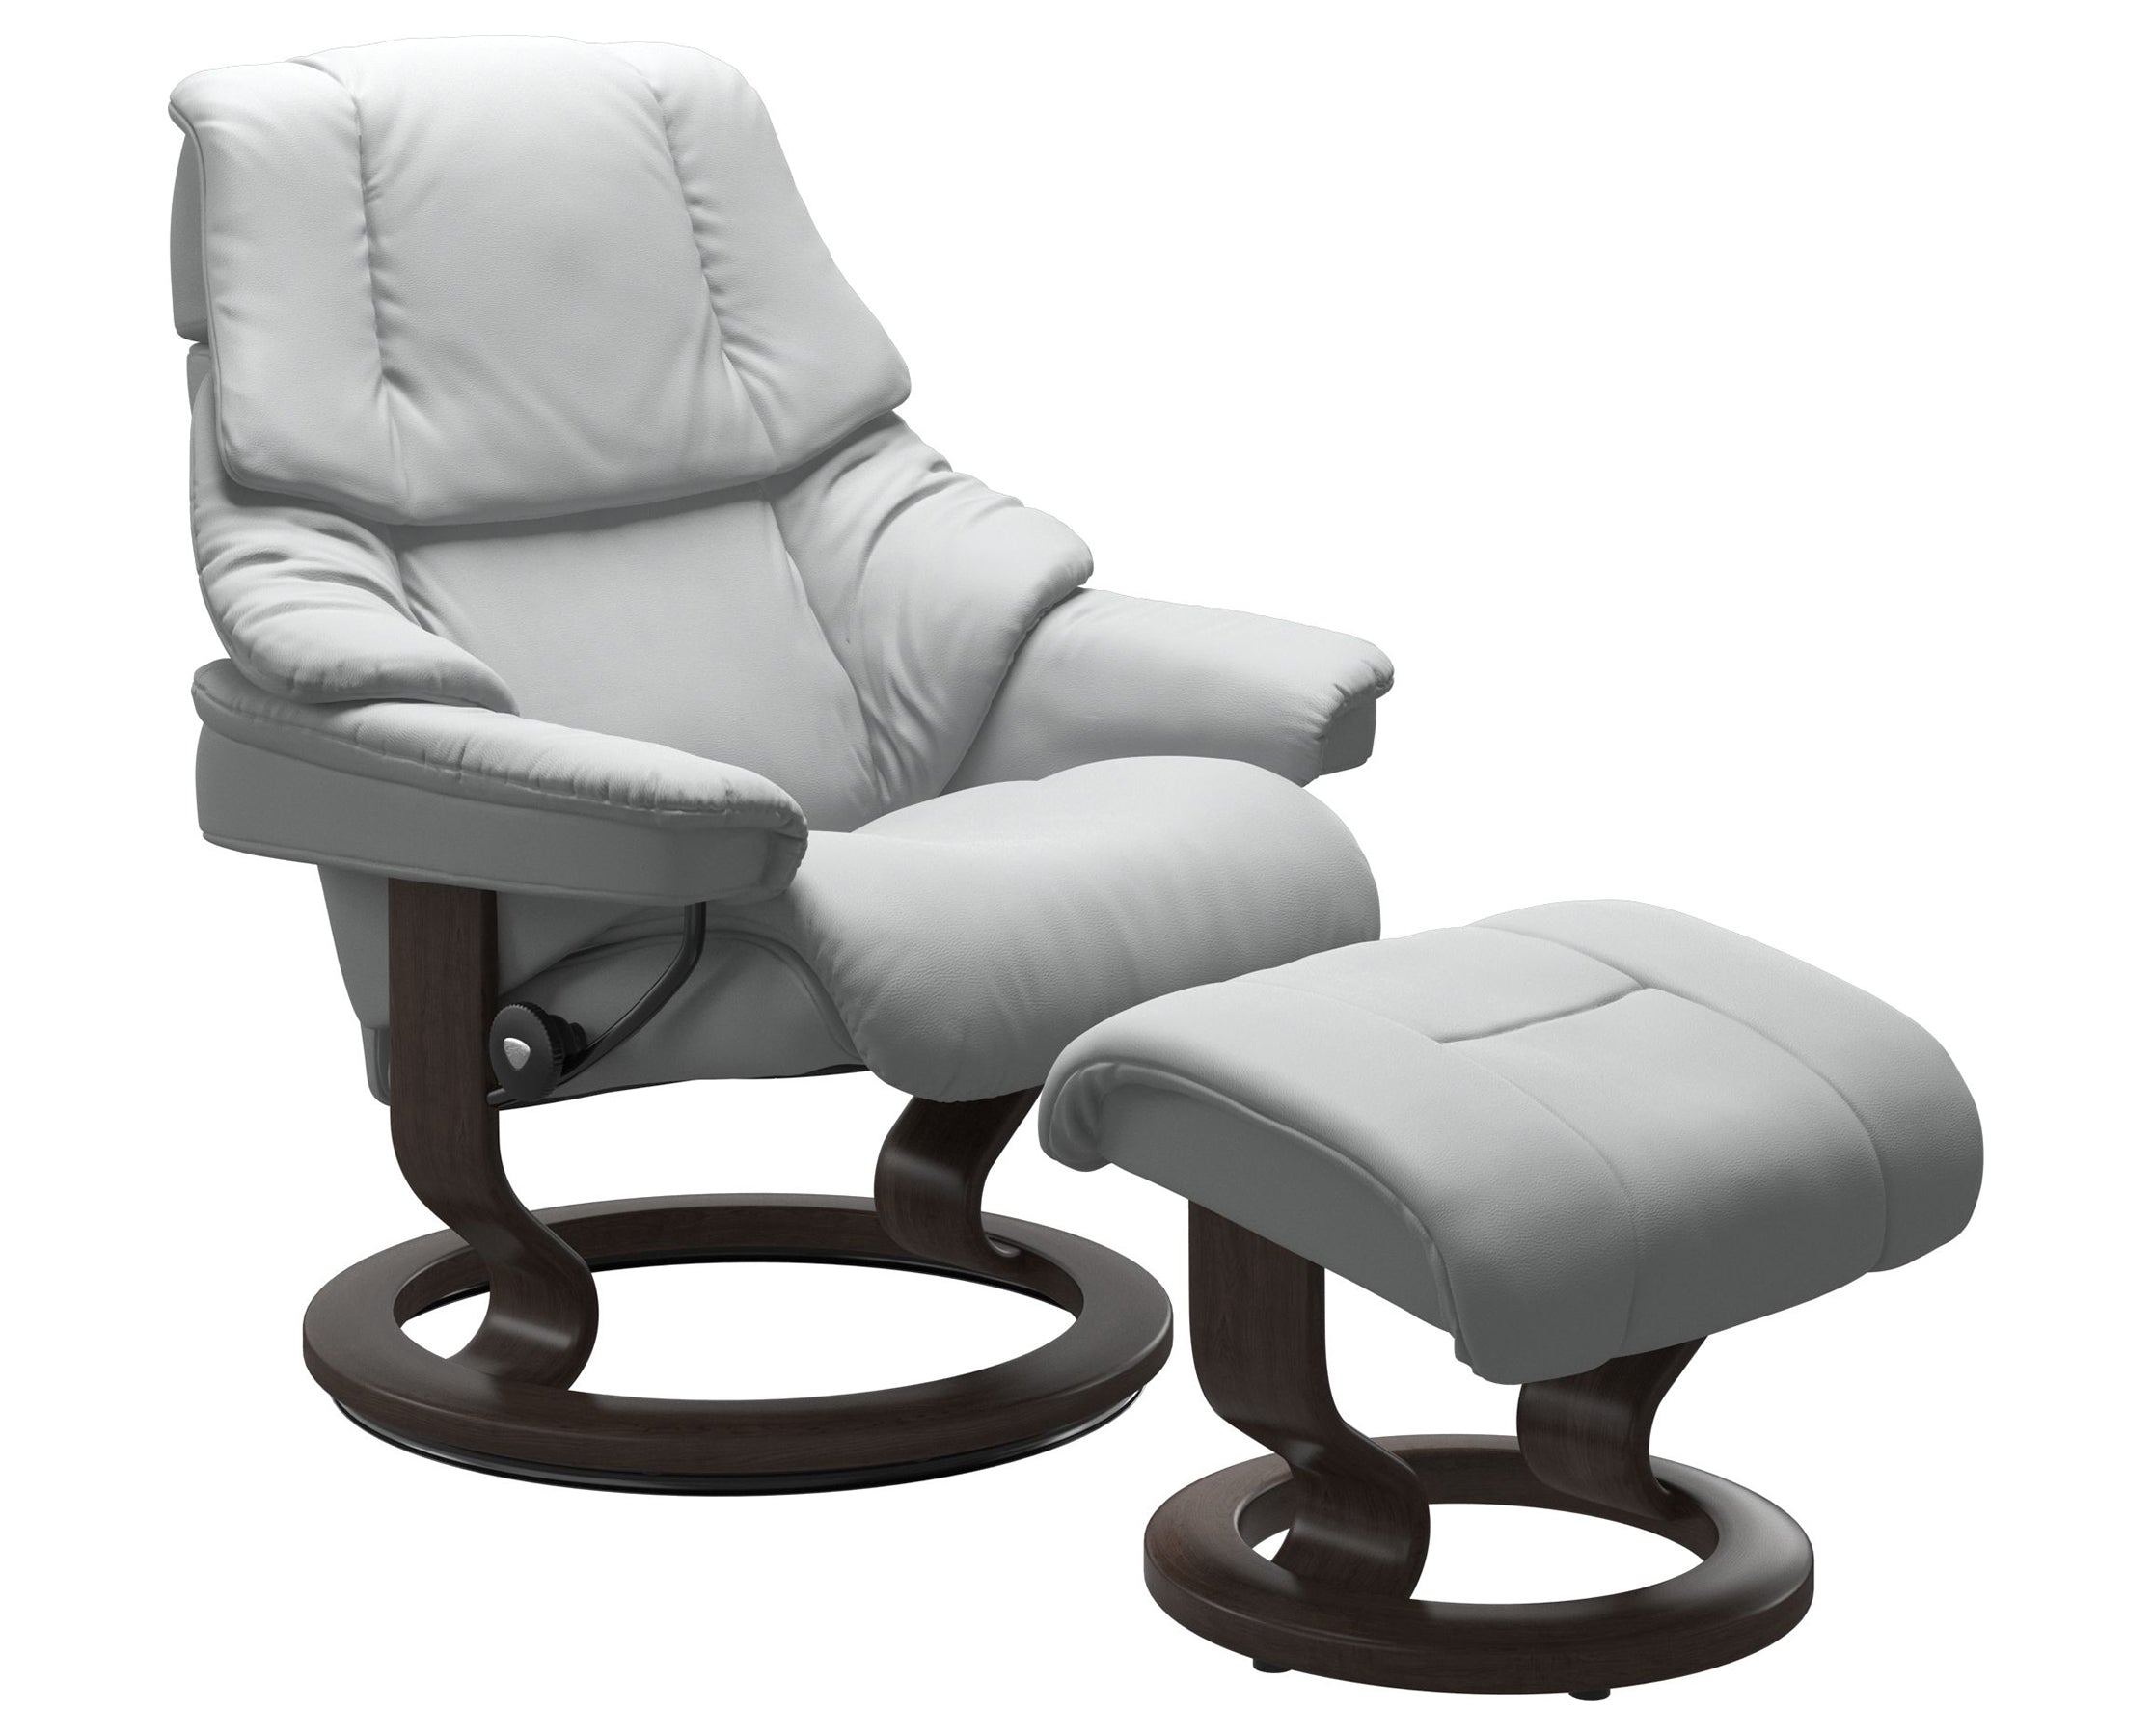 Paloma Leather Misty Grey S/M/L and Wenge Base | Stressless Reno Classic Recliner | Valley Ridge Furniture